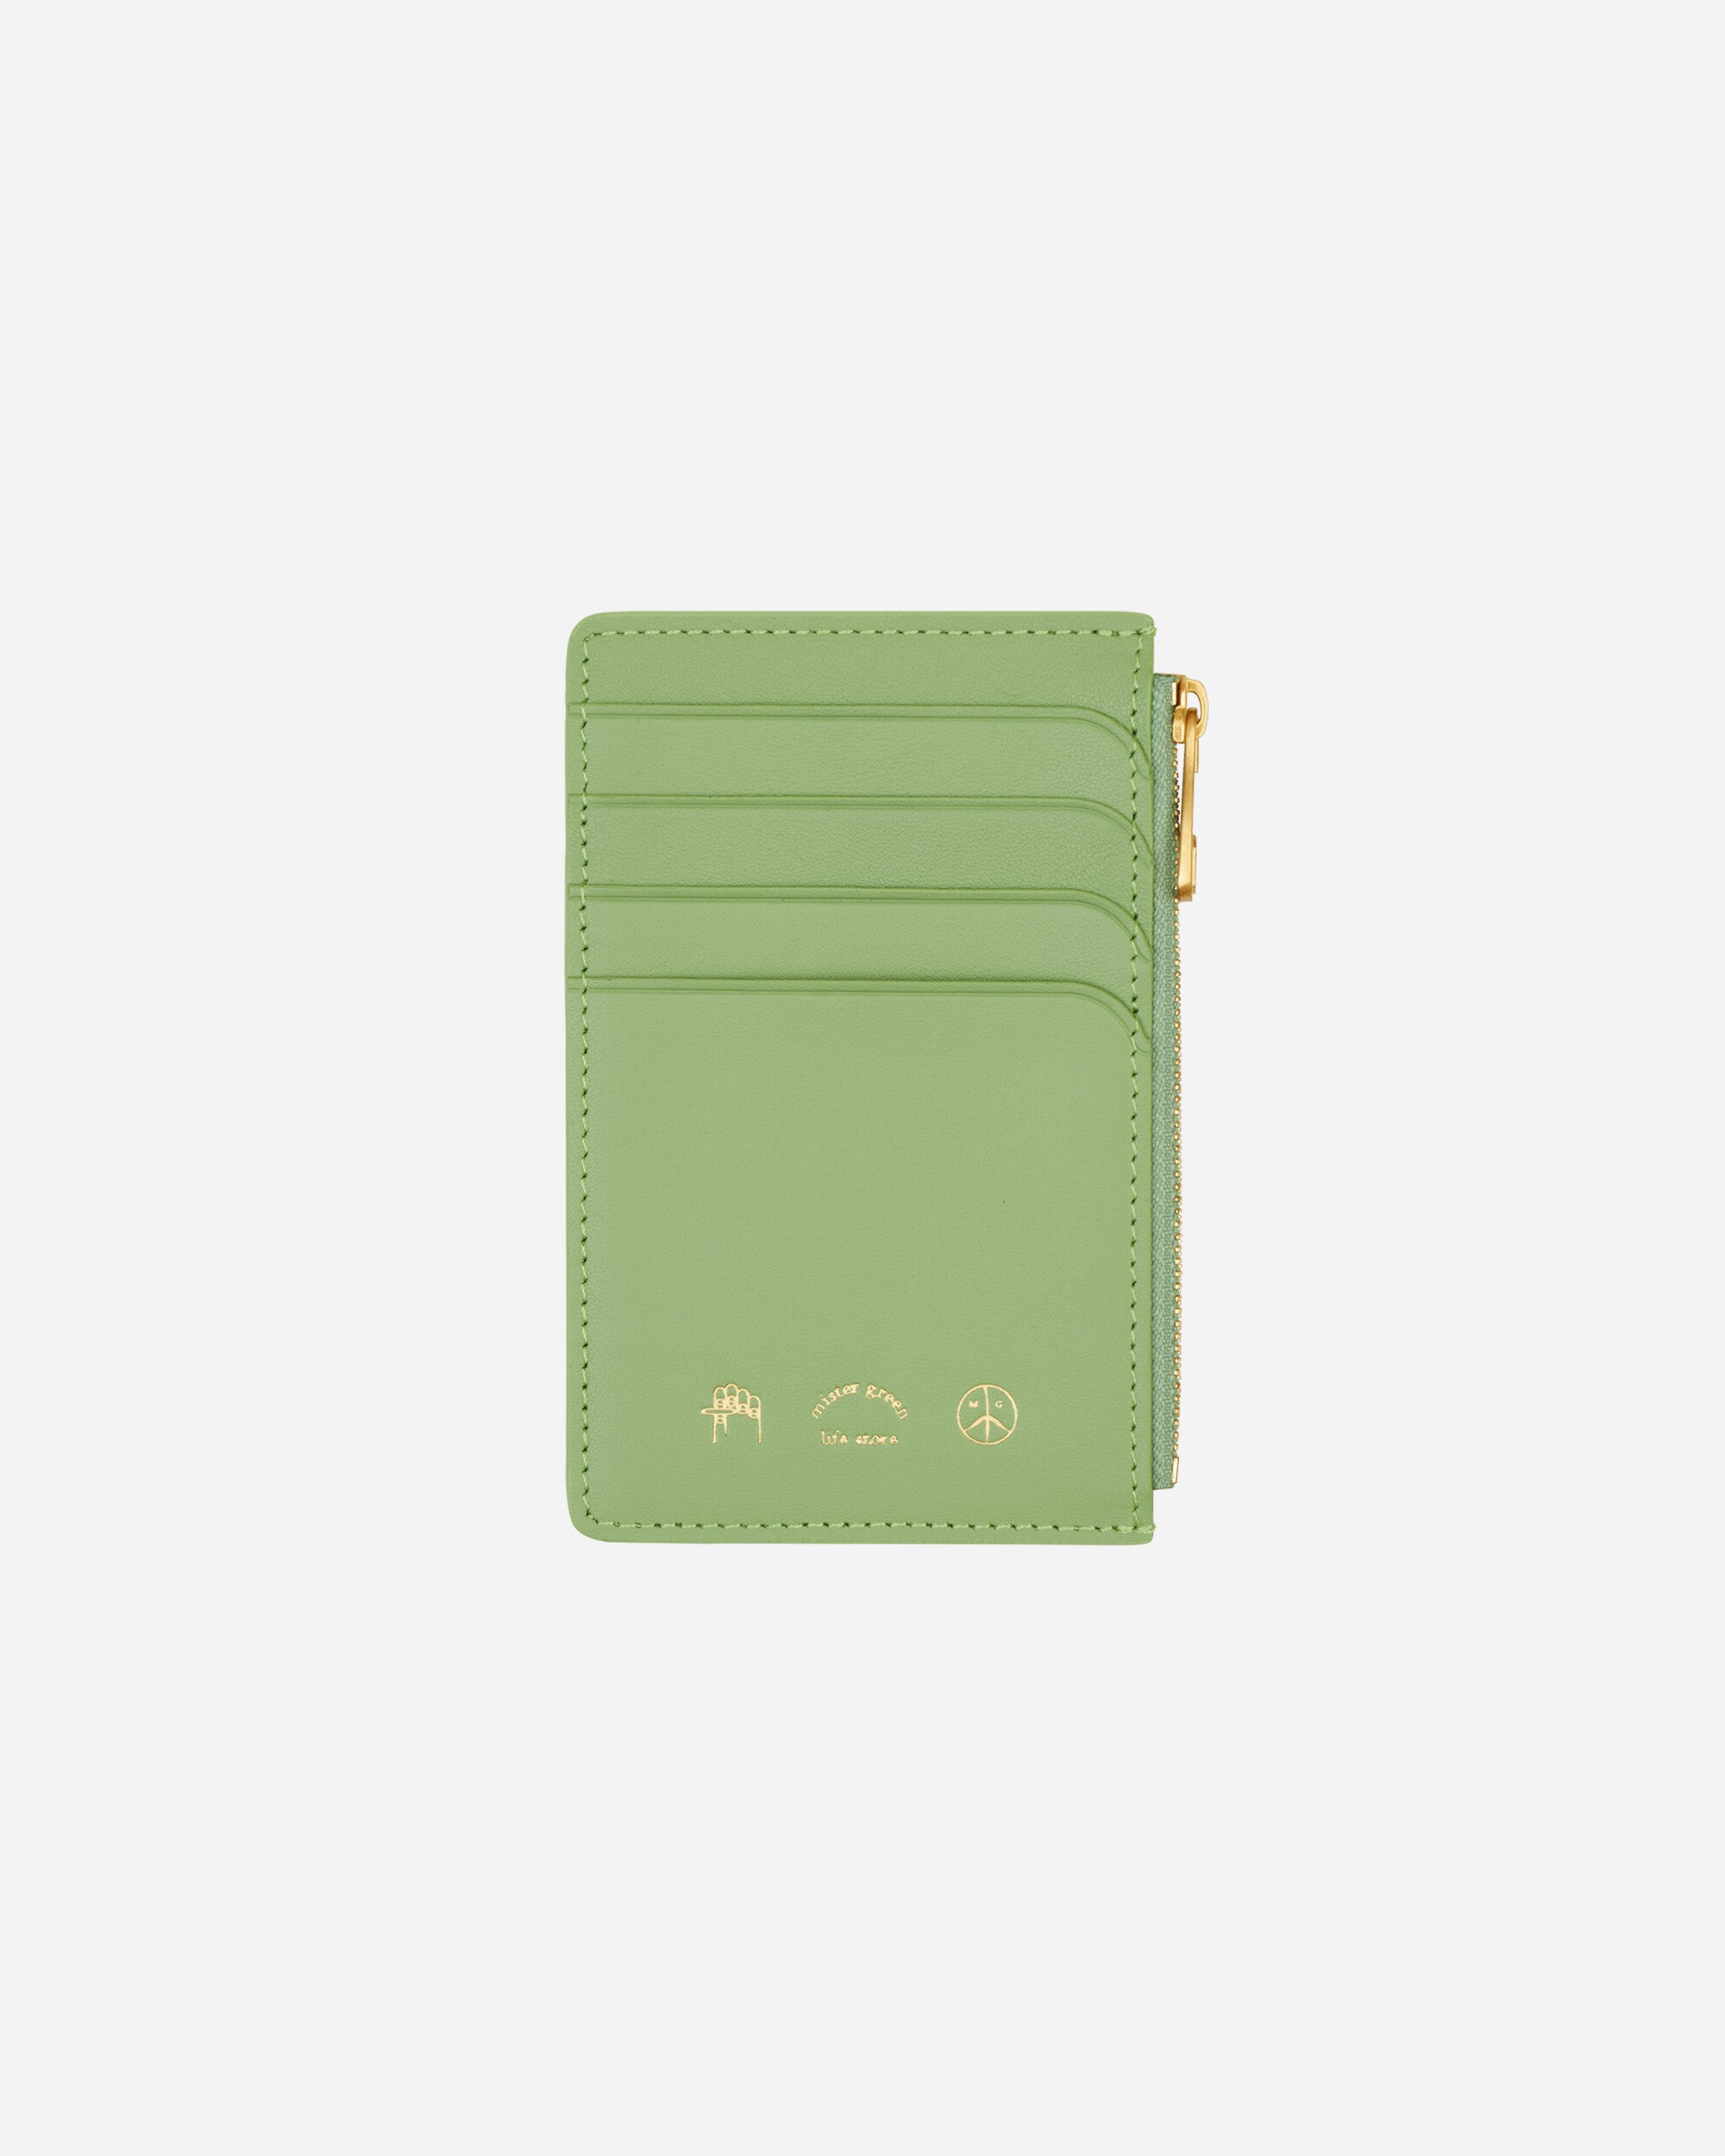 Mister Green Zippered Card Case Green Wallets and Cardholders Cardholders MGZIPCARDCASE 001